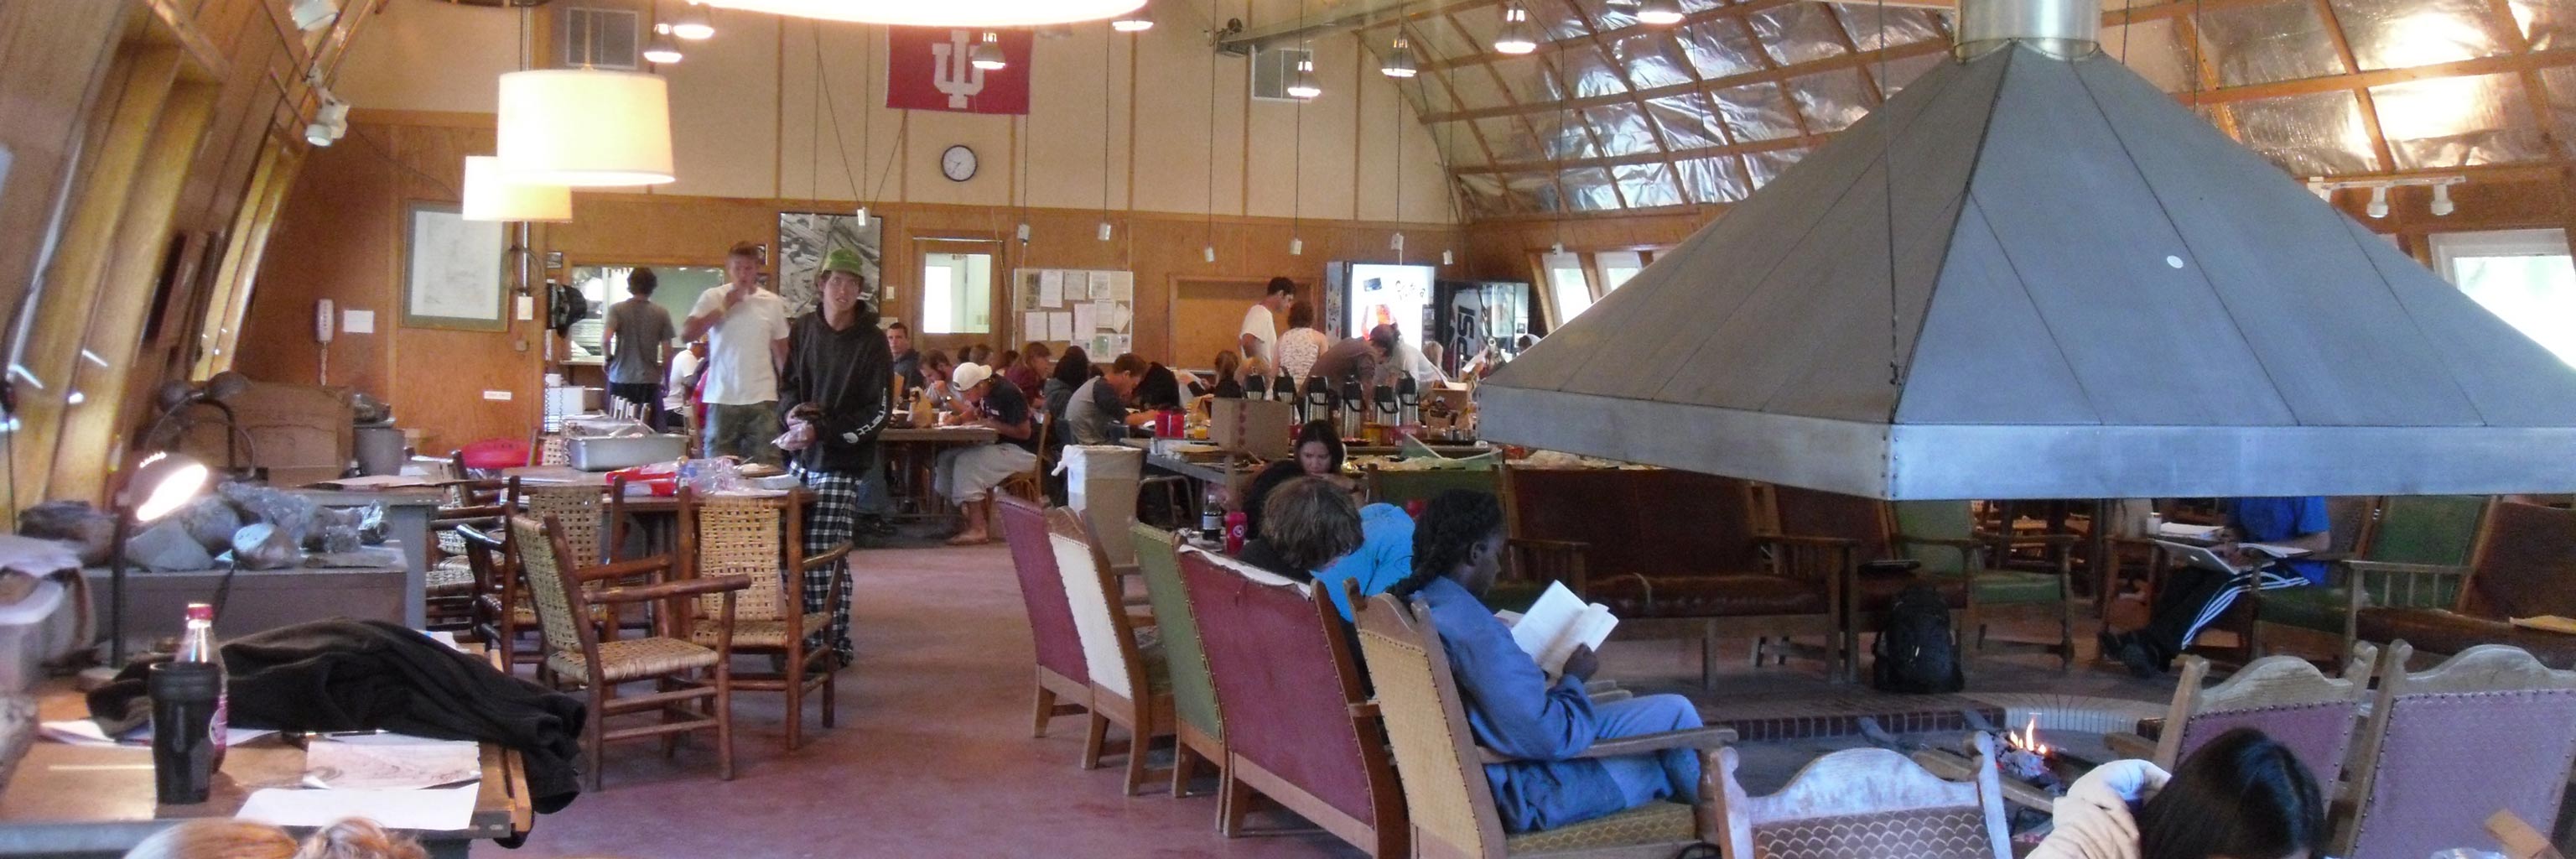 inside lodge of the field station